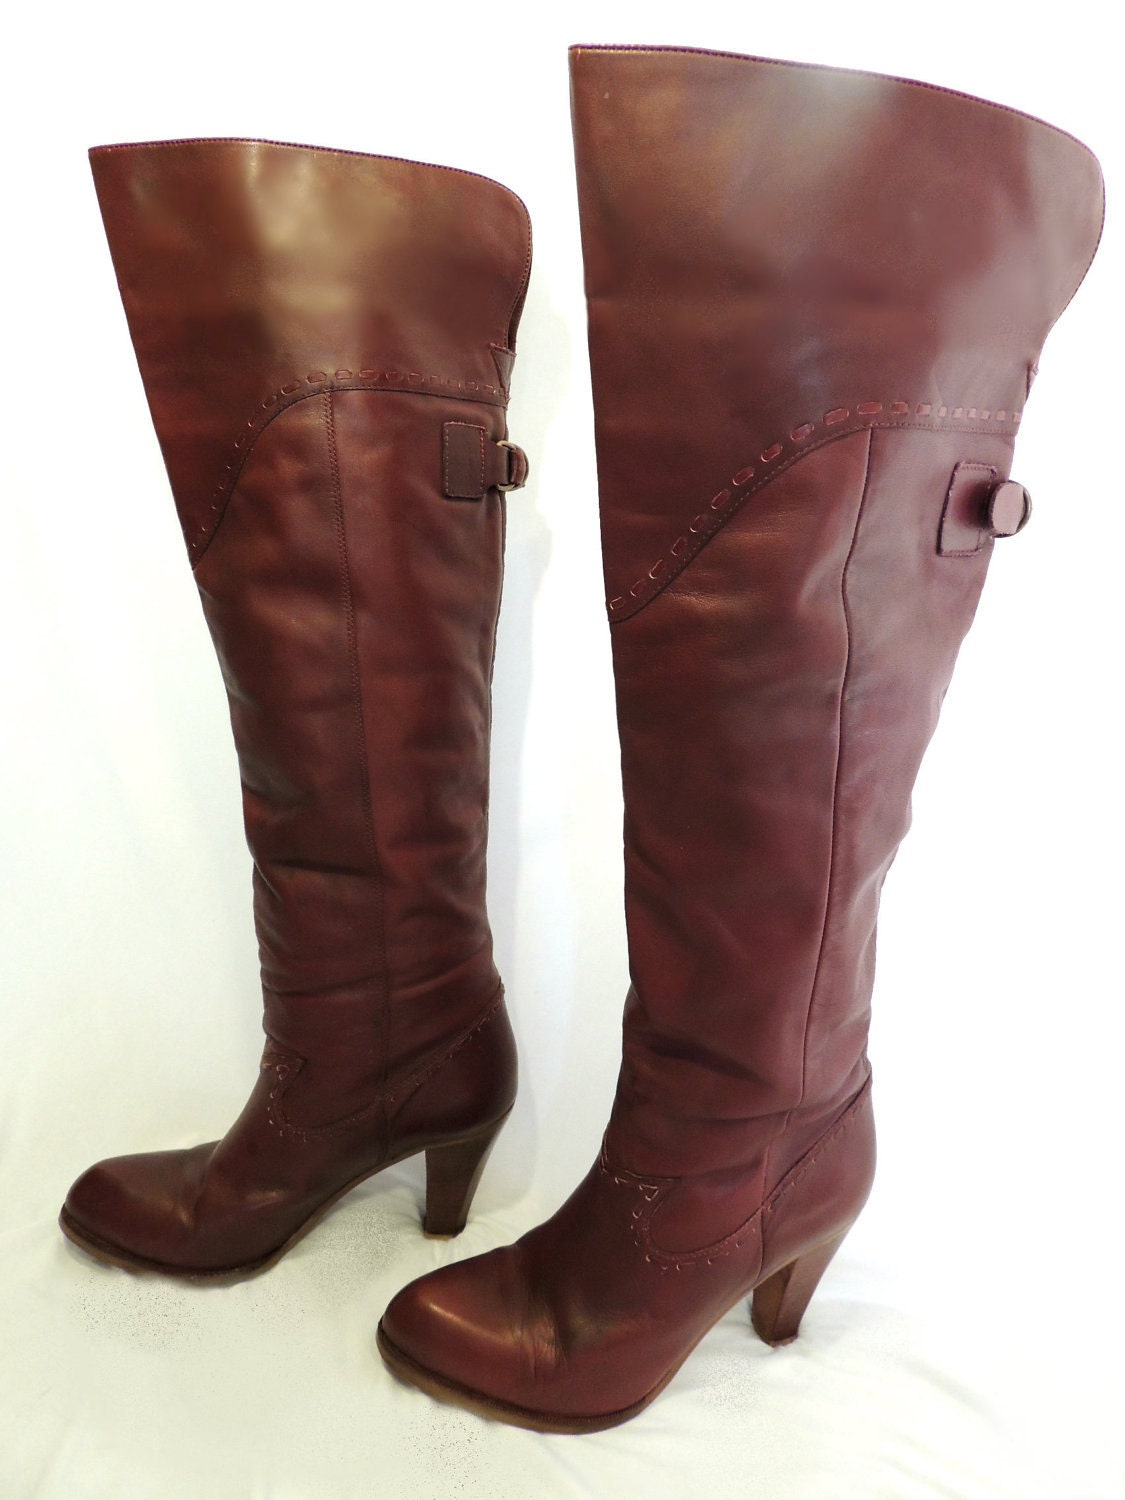 Vintage 70s Boots Bare Traps RARE Knee High Stacked by BoWinston